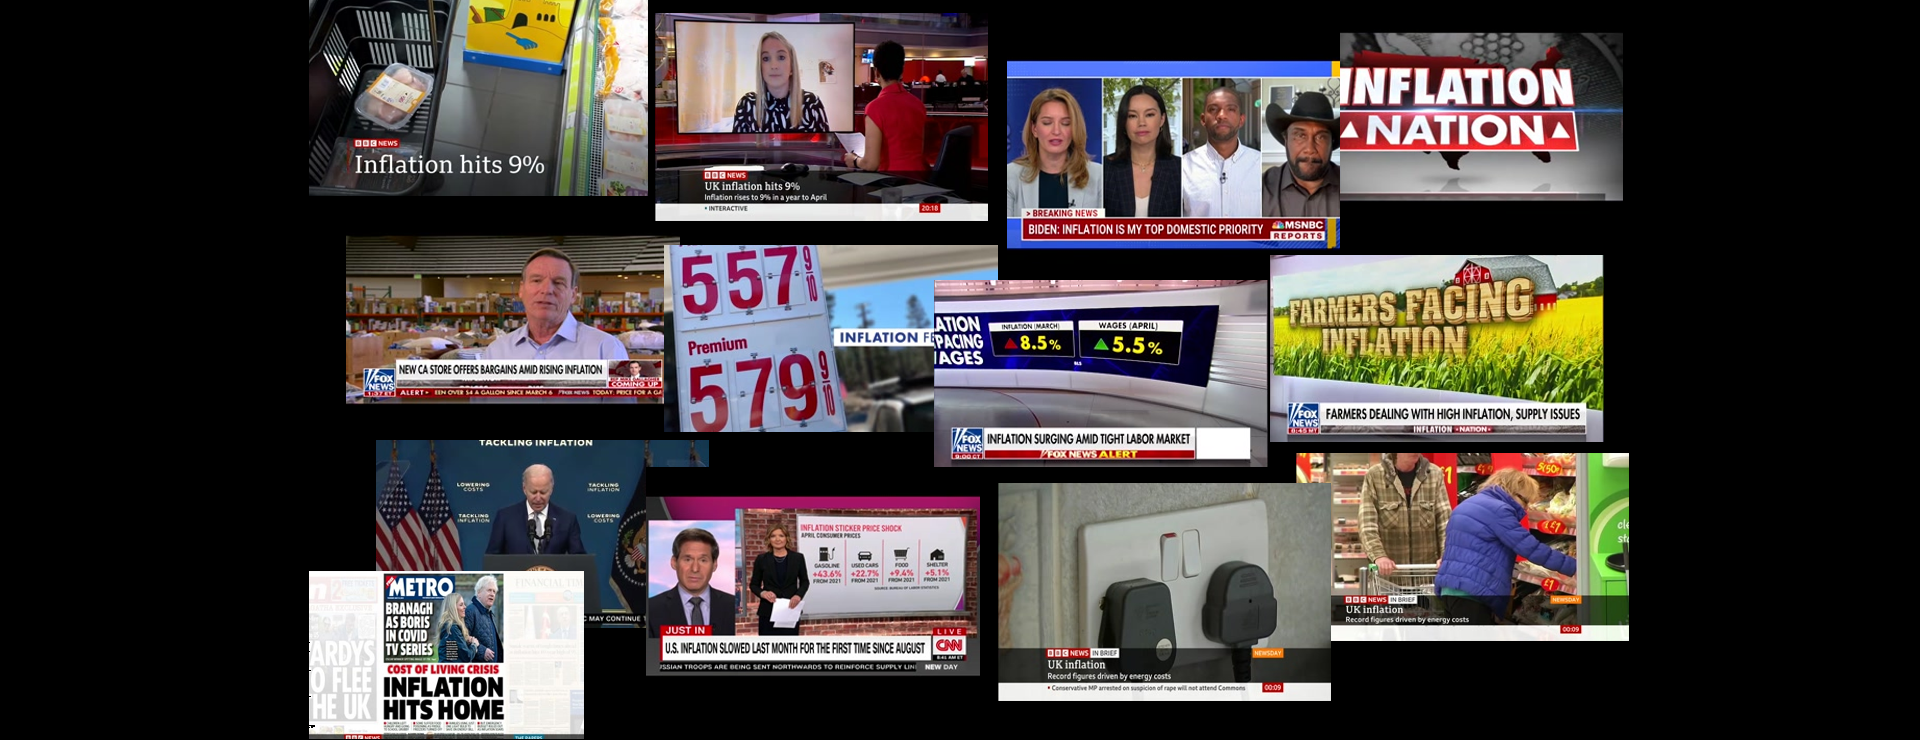 The Visual Portrayals Of Inflation On Television News